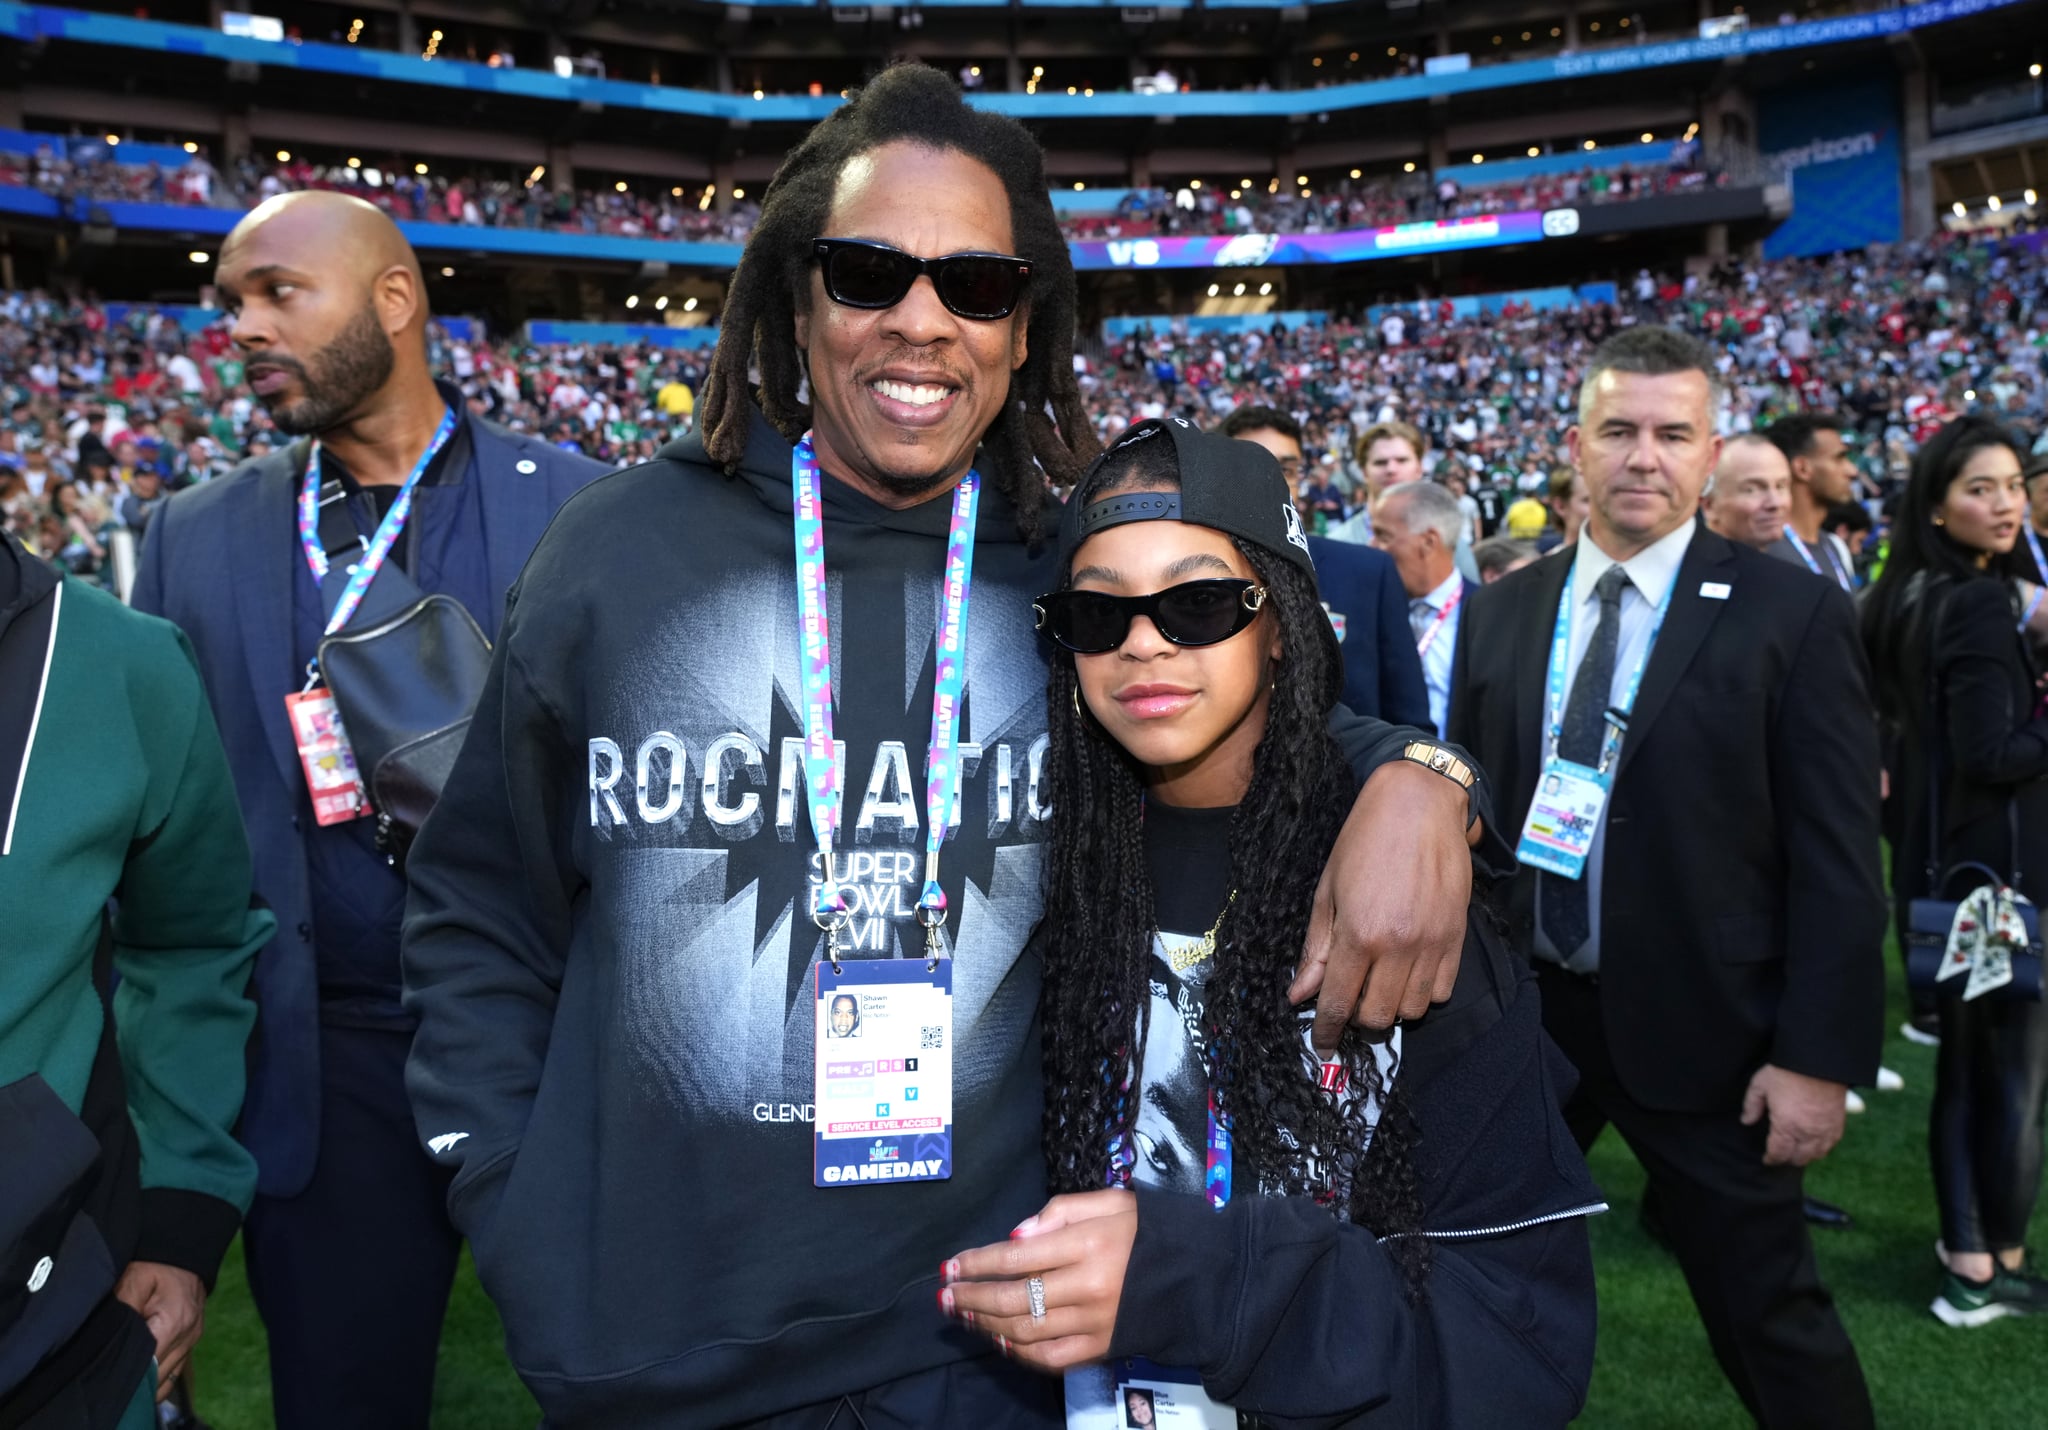 GLENDALE, ARIZONA - FEBRUARY 12:  (L-R) Jay-Z and Blue Ivy Carter attend Super Bowl LVII at State Farm Stadium on February 12, 2023 in Glendale, Arizona. (Photo by Kevin Mazur/Getty Images for Roc Nation)